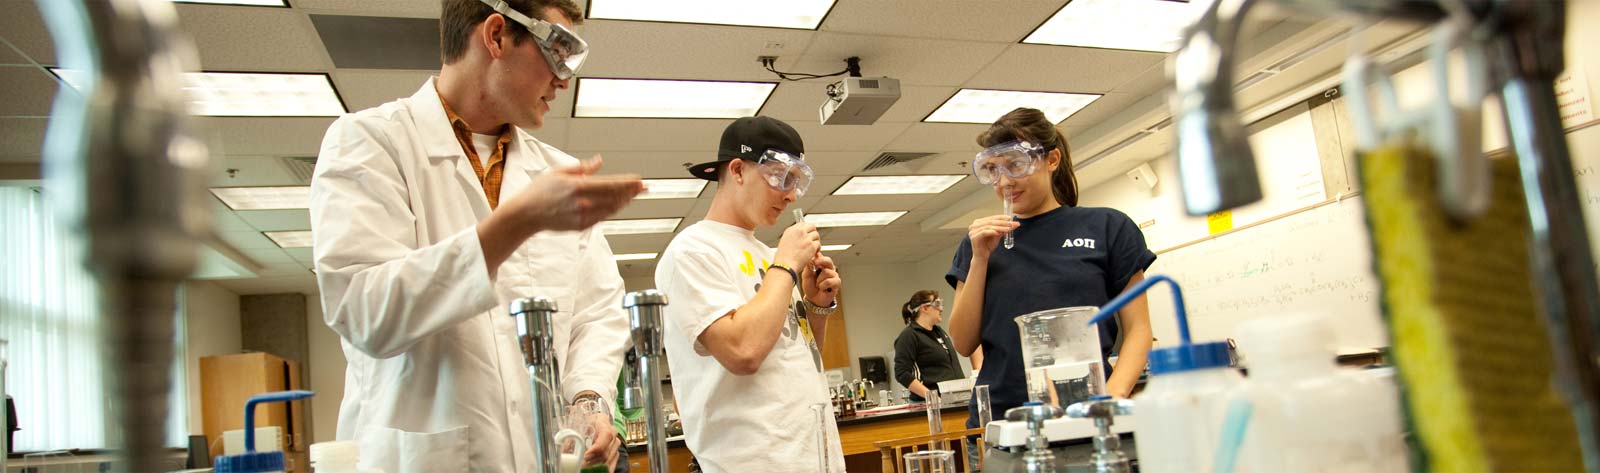 Students doing science